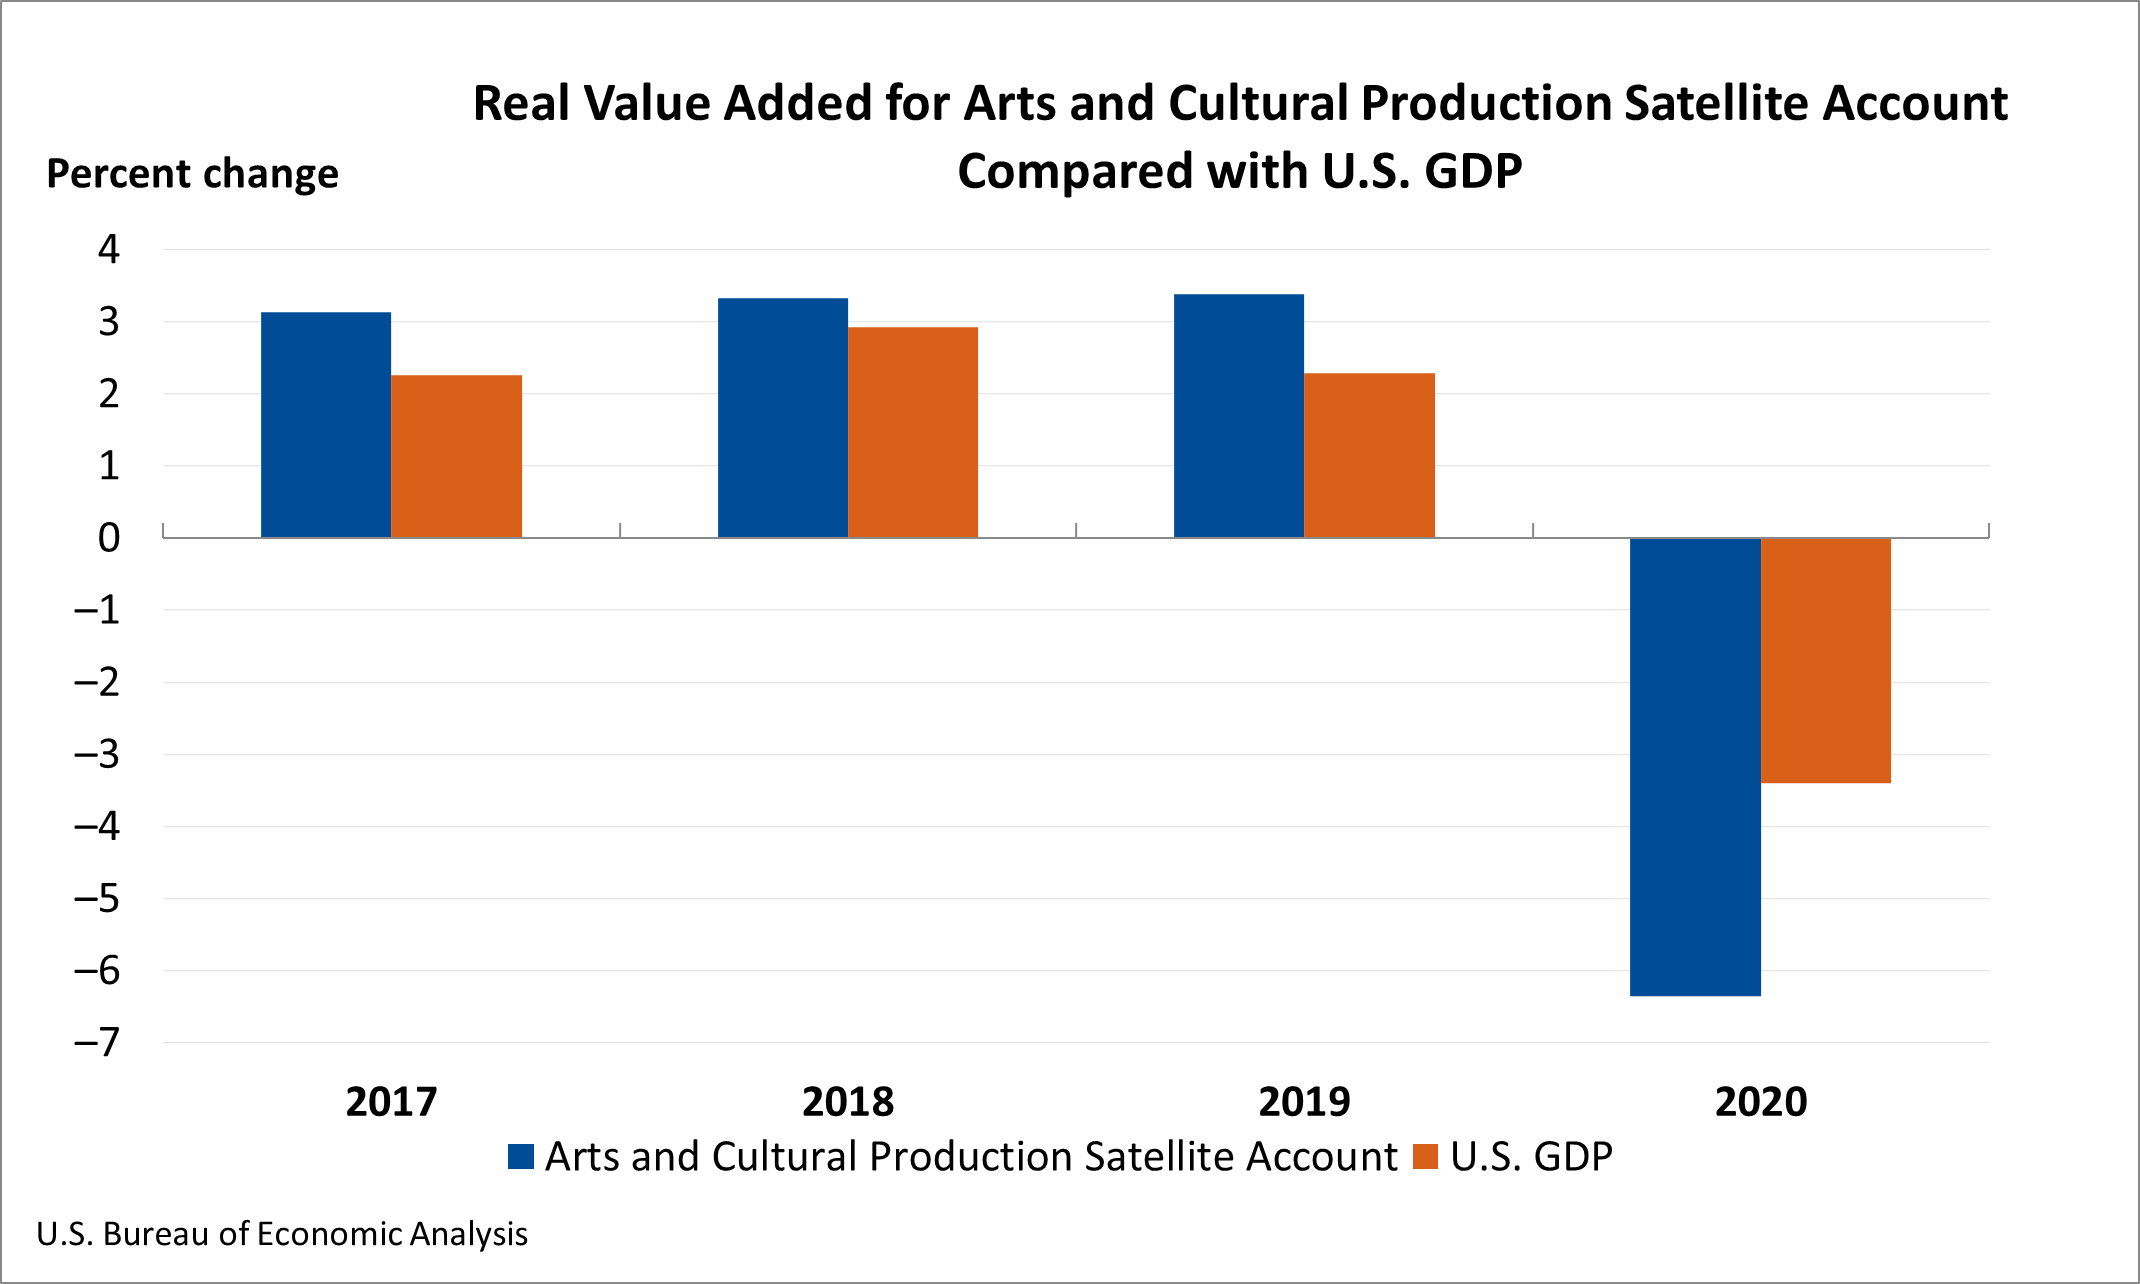 Real Value Added for ACPSA Compared pinch US GDP